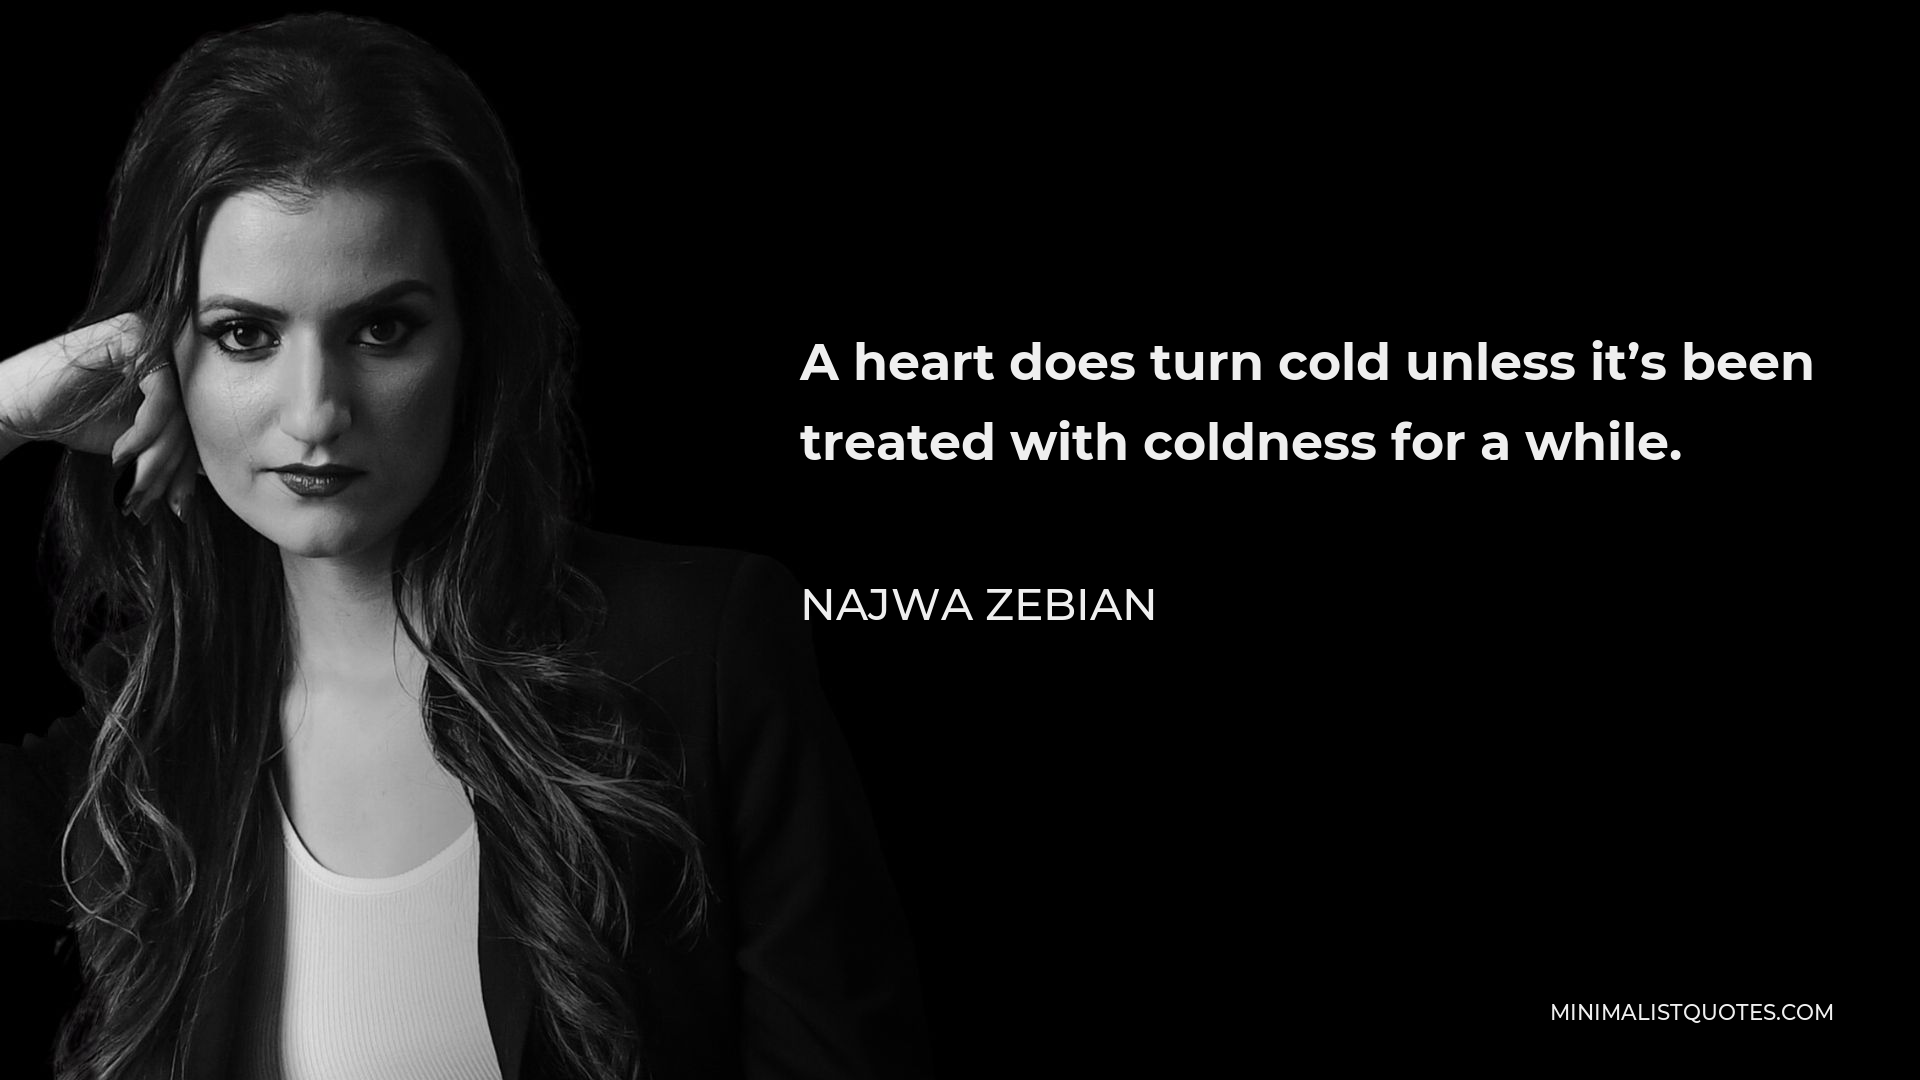 Najwa Zebian Quote - A heart does turn cold unless it’s been treated with coldness for a while.